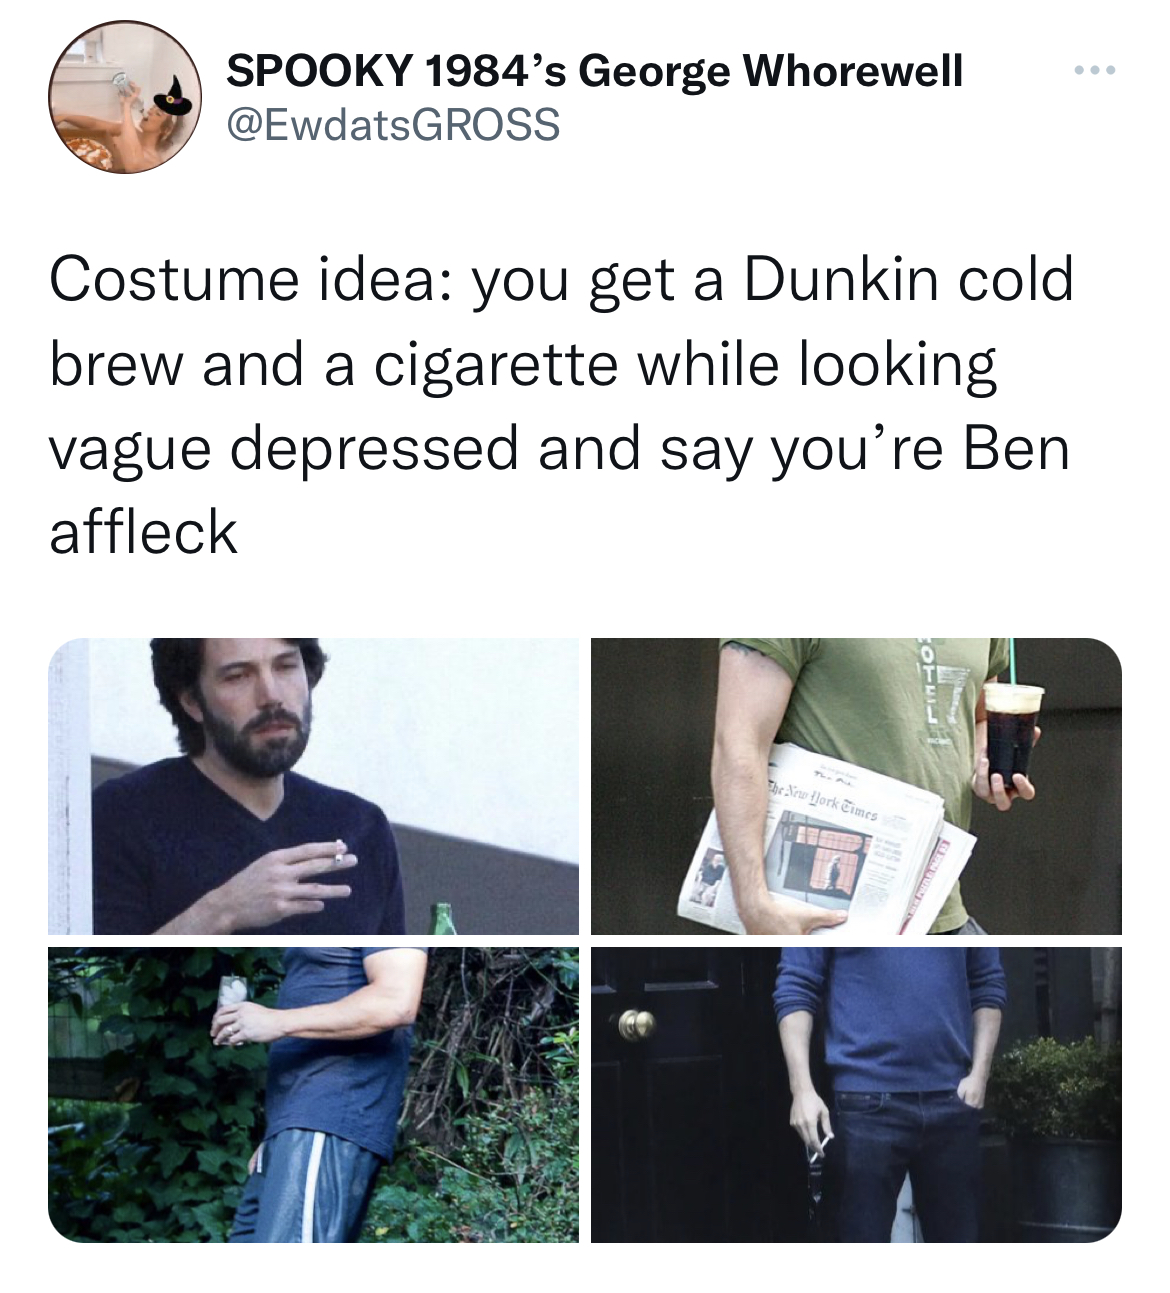 Savage Tweets - shoulder - pooky 1984's George Whorewell Costume idea you get a Dunkin cold brew and a cigarette while looking vague depressed and say you're Ben affleck